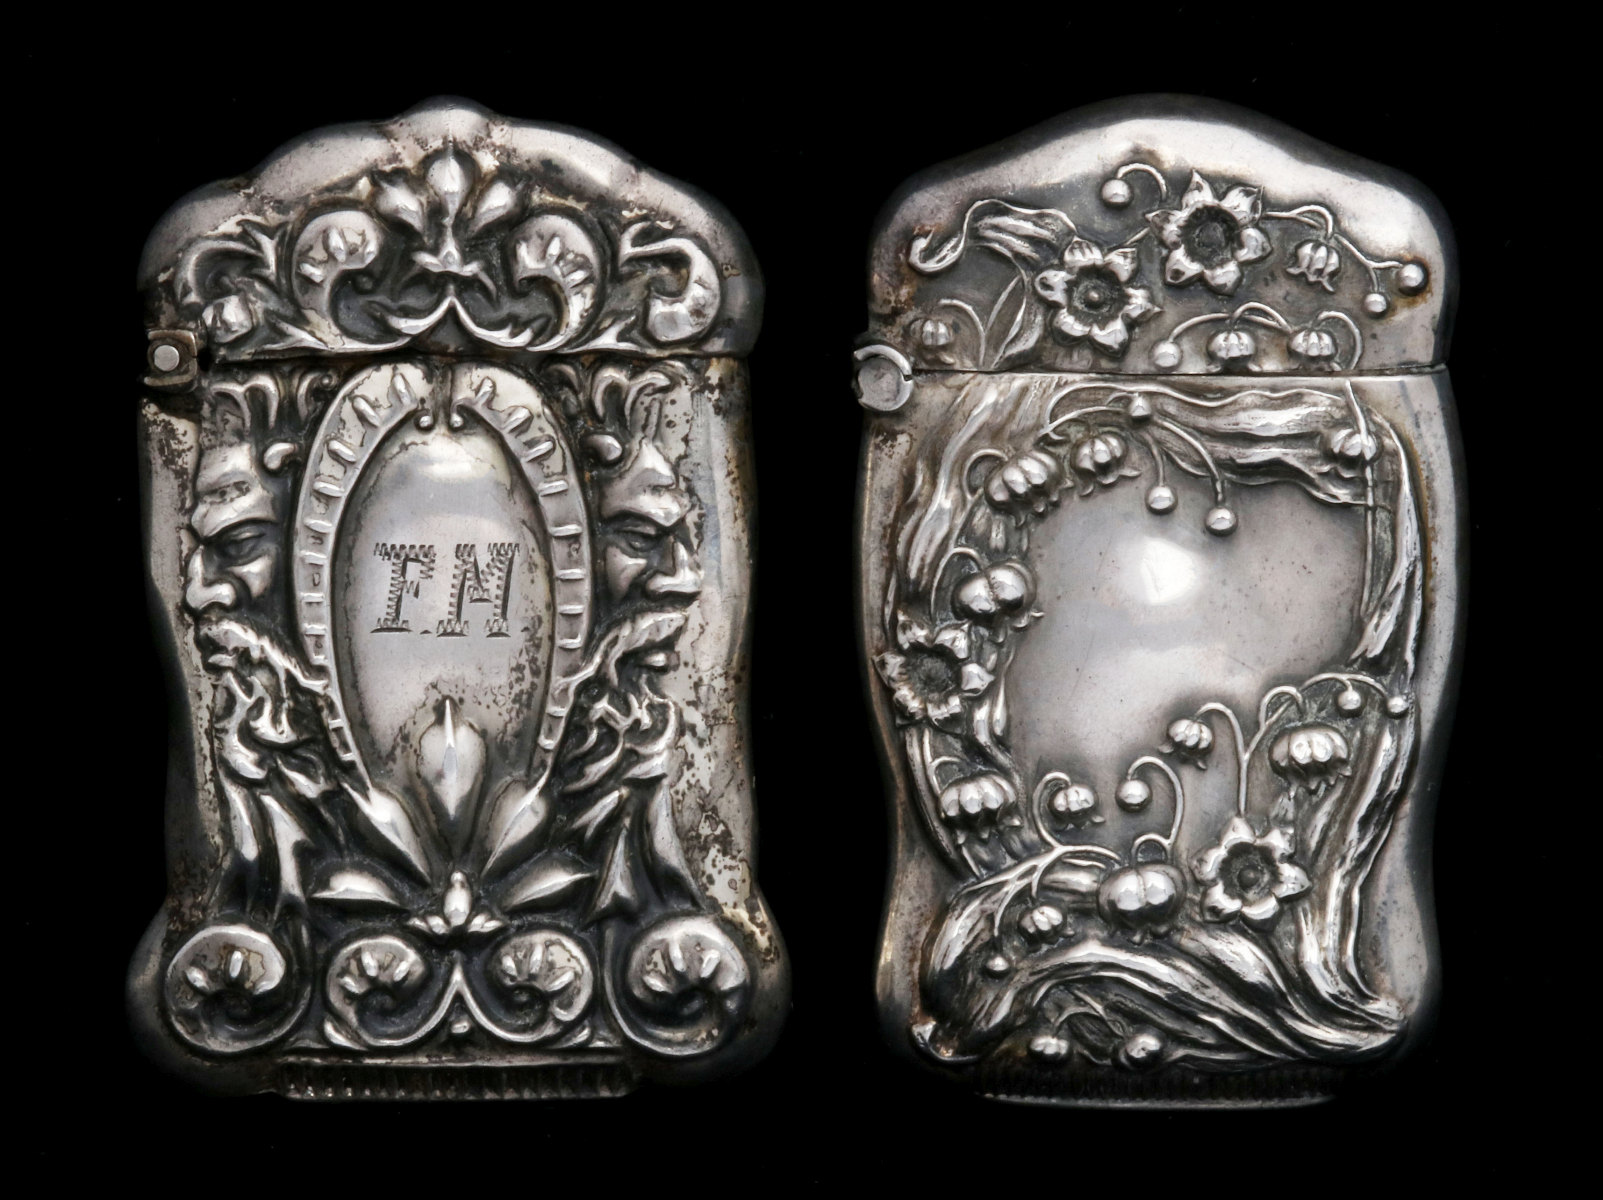 TWO ANTIQUE STERLING SILVER MATCH SAFES